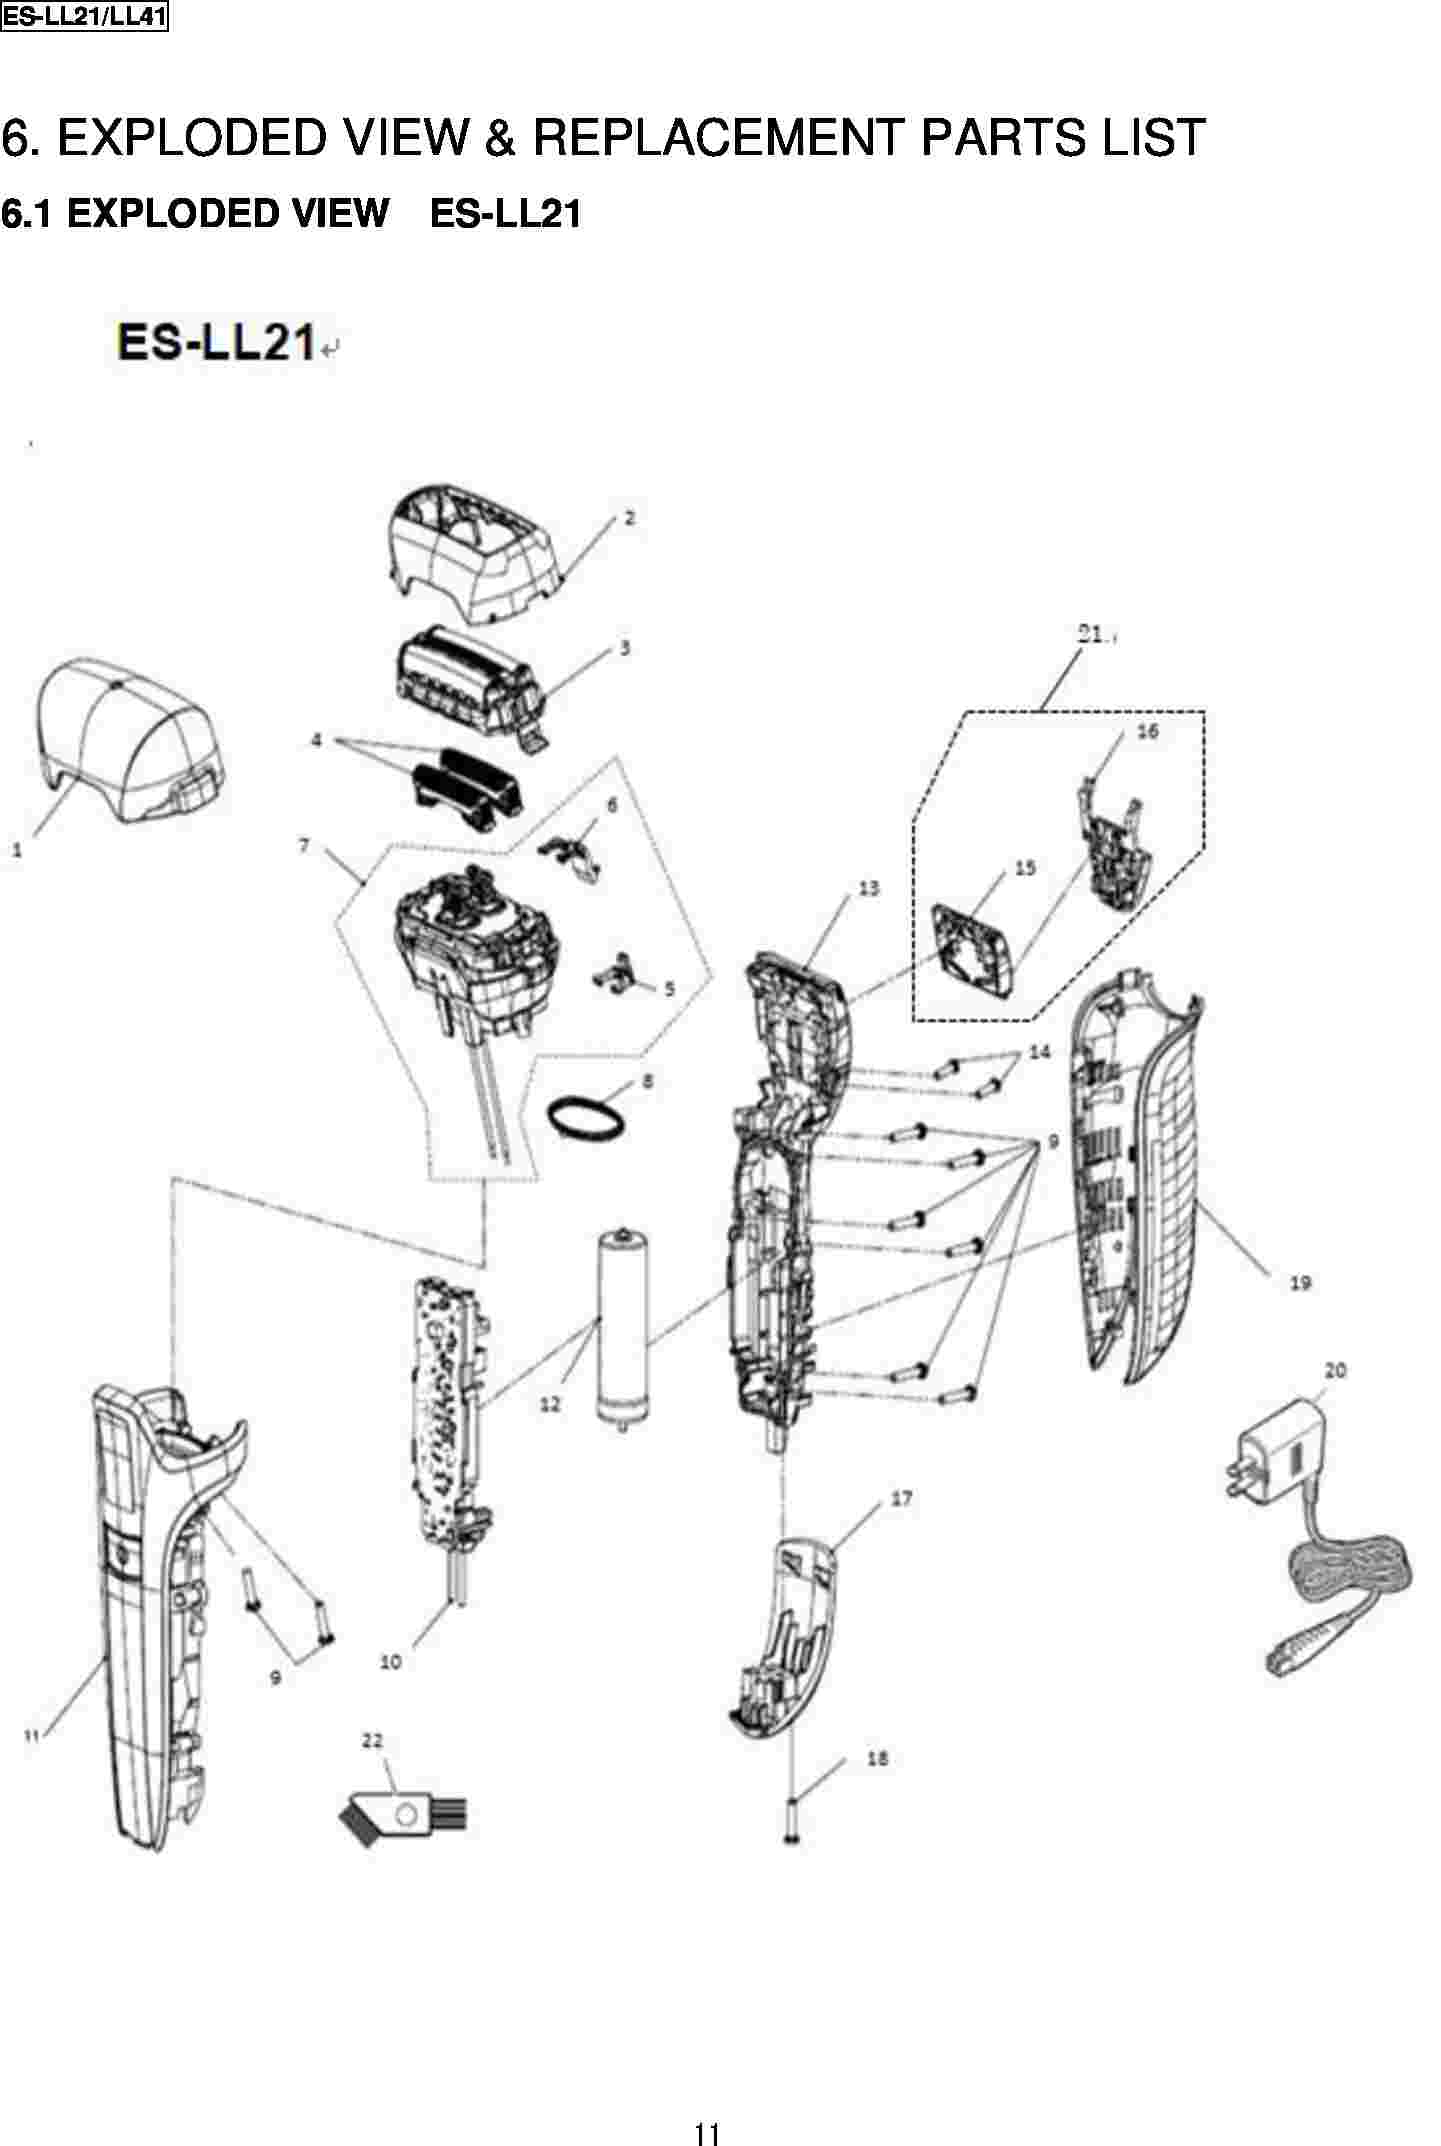 ES-LL21: Exploded View